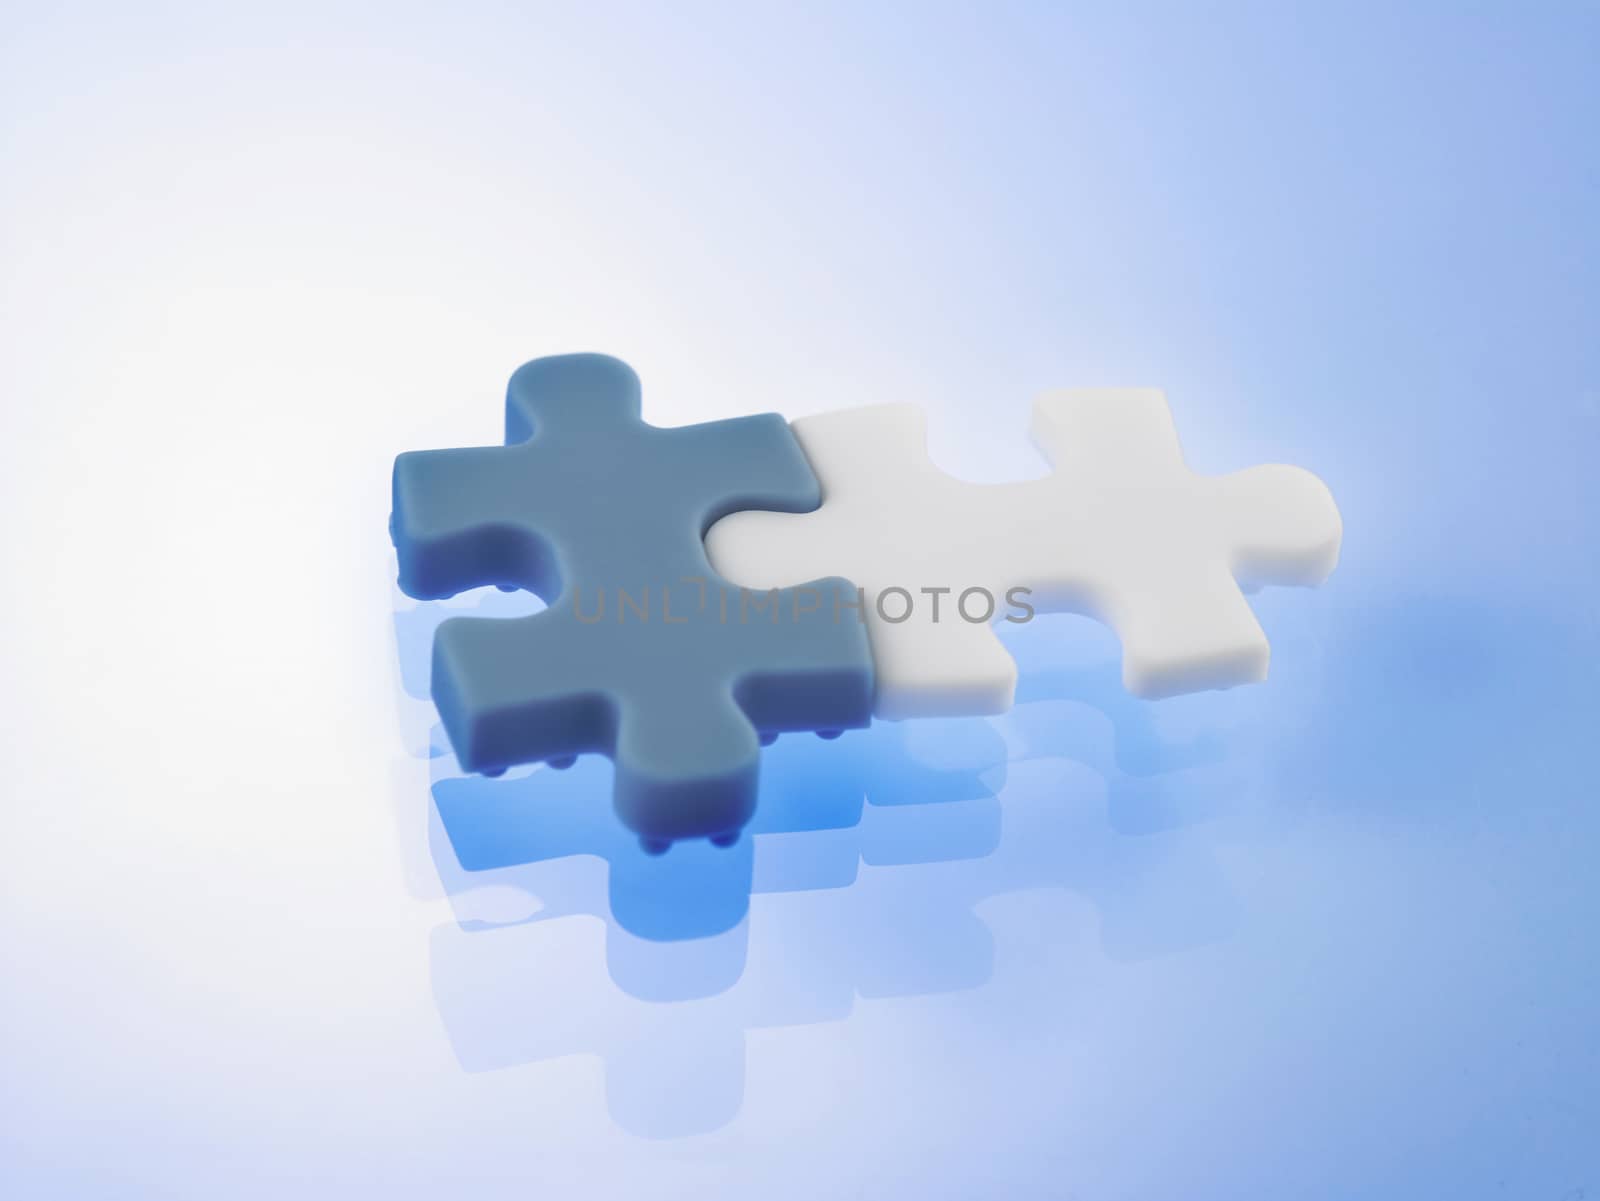 Business Teamwork Concept by Jigsaw Puzzle Pieces

